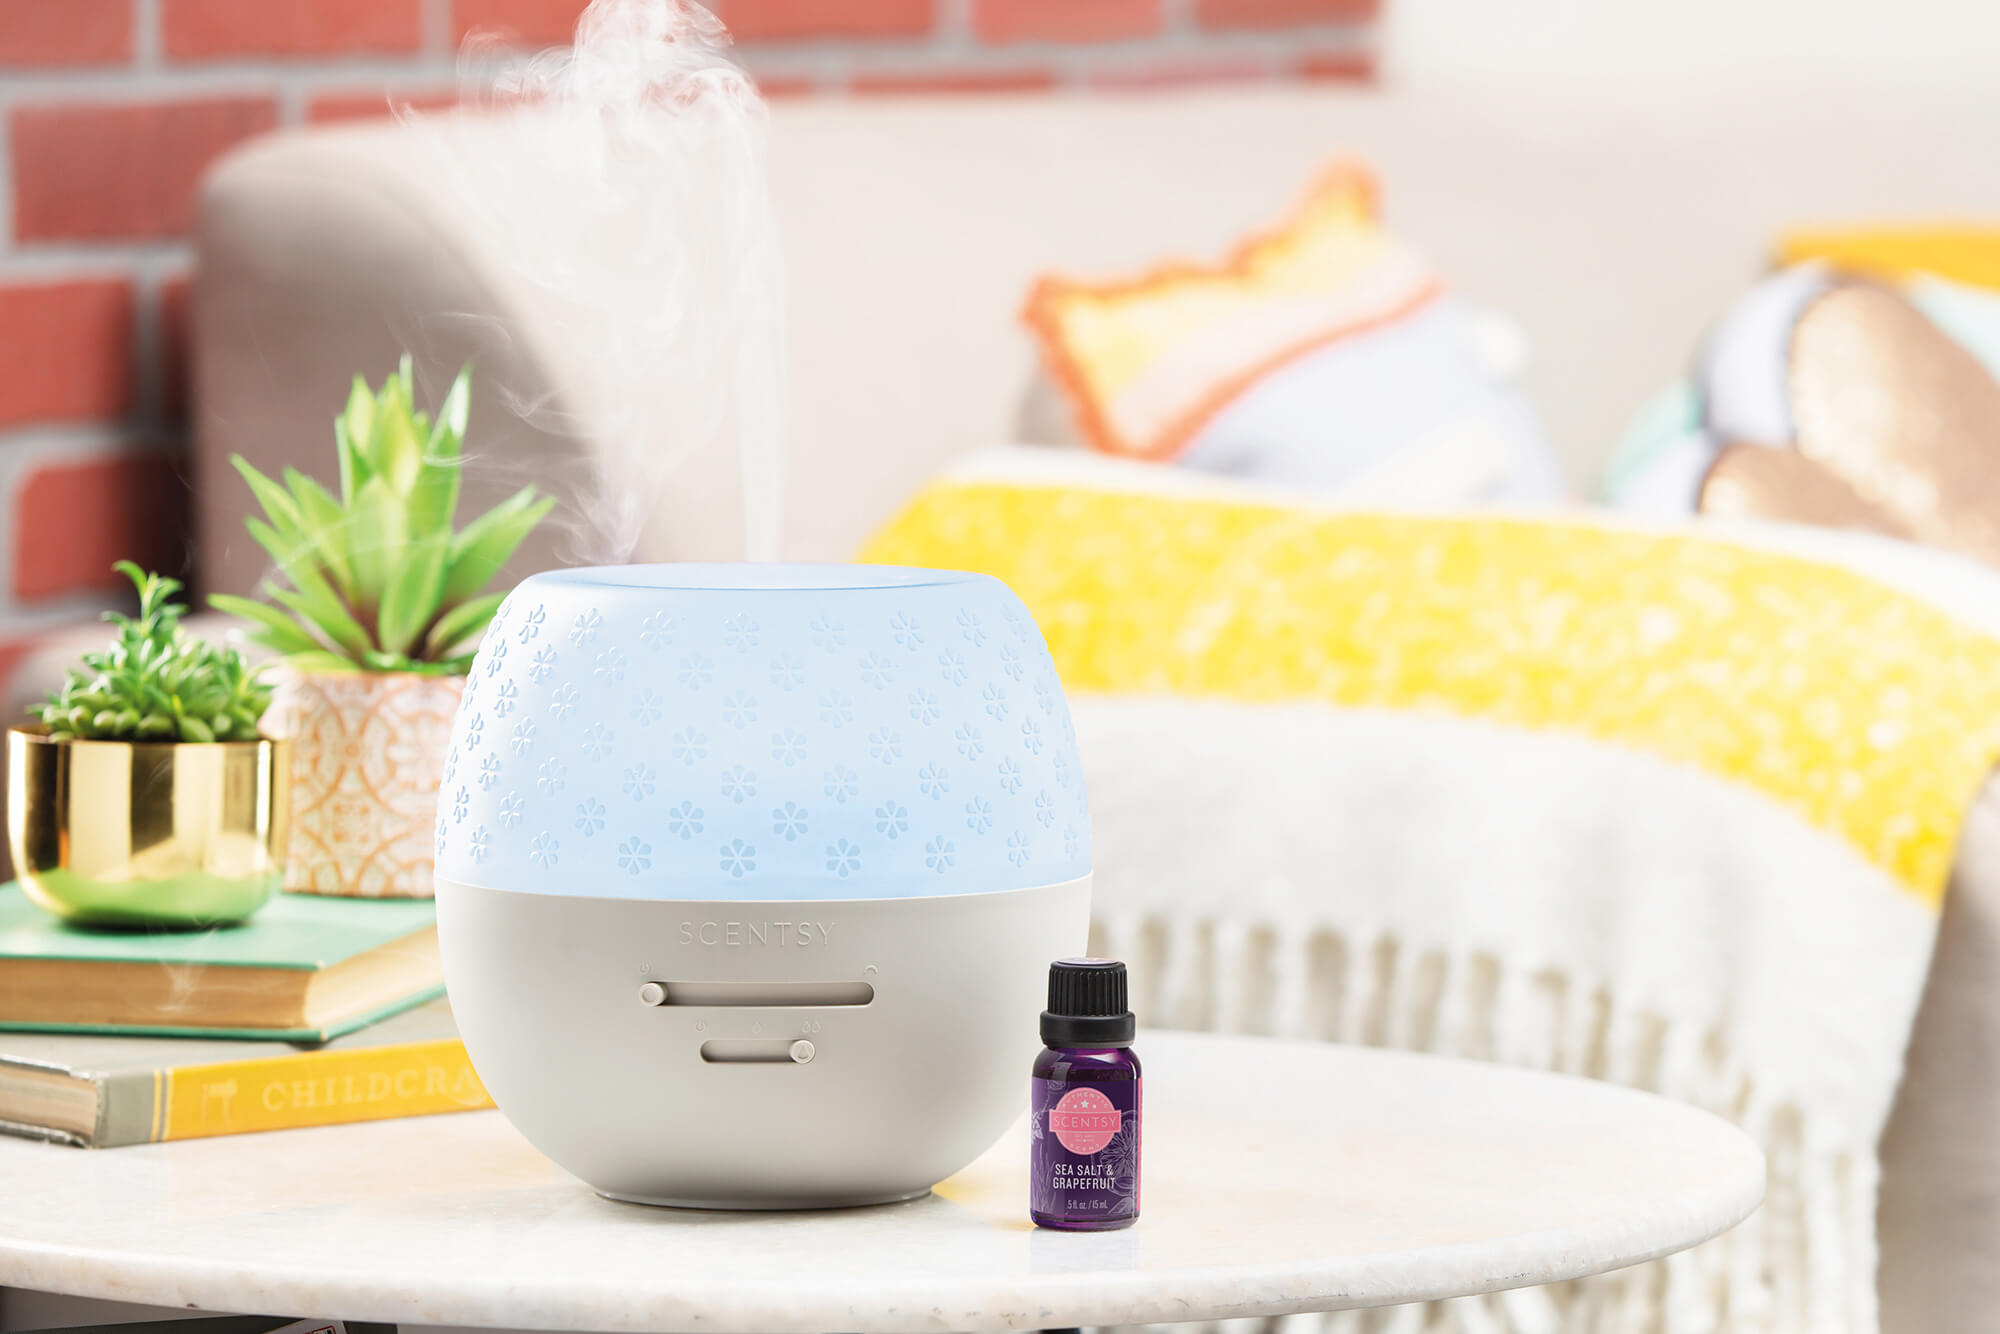 Which Scentsy Oil is best for you?